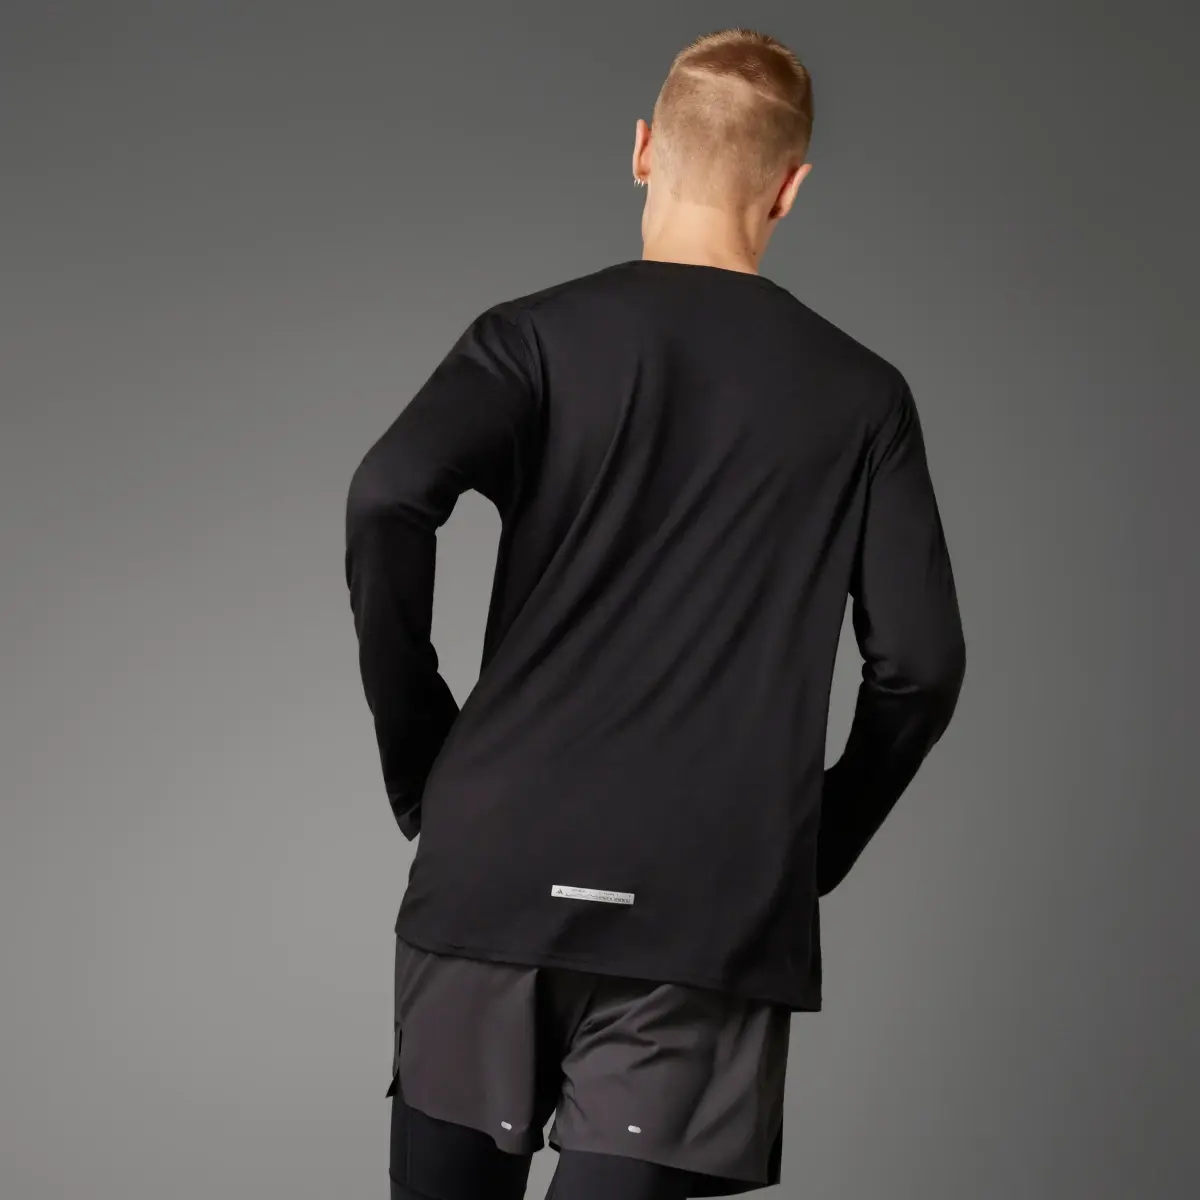 Adidas Ultimate Running Conquer the Elements Merino Longsleeve. 2